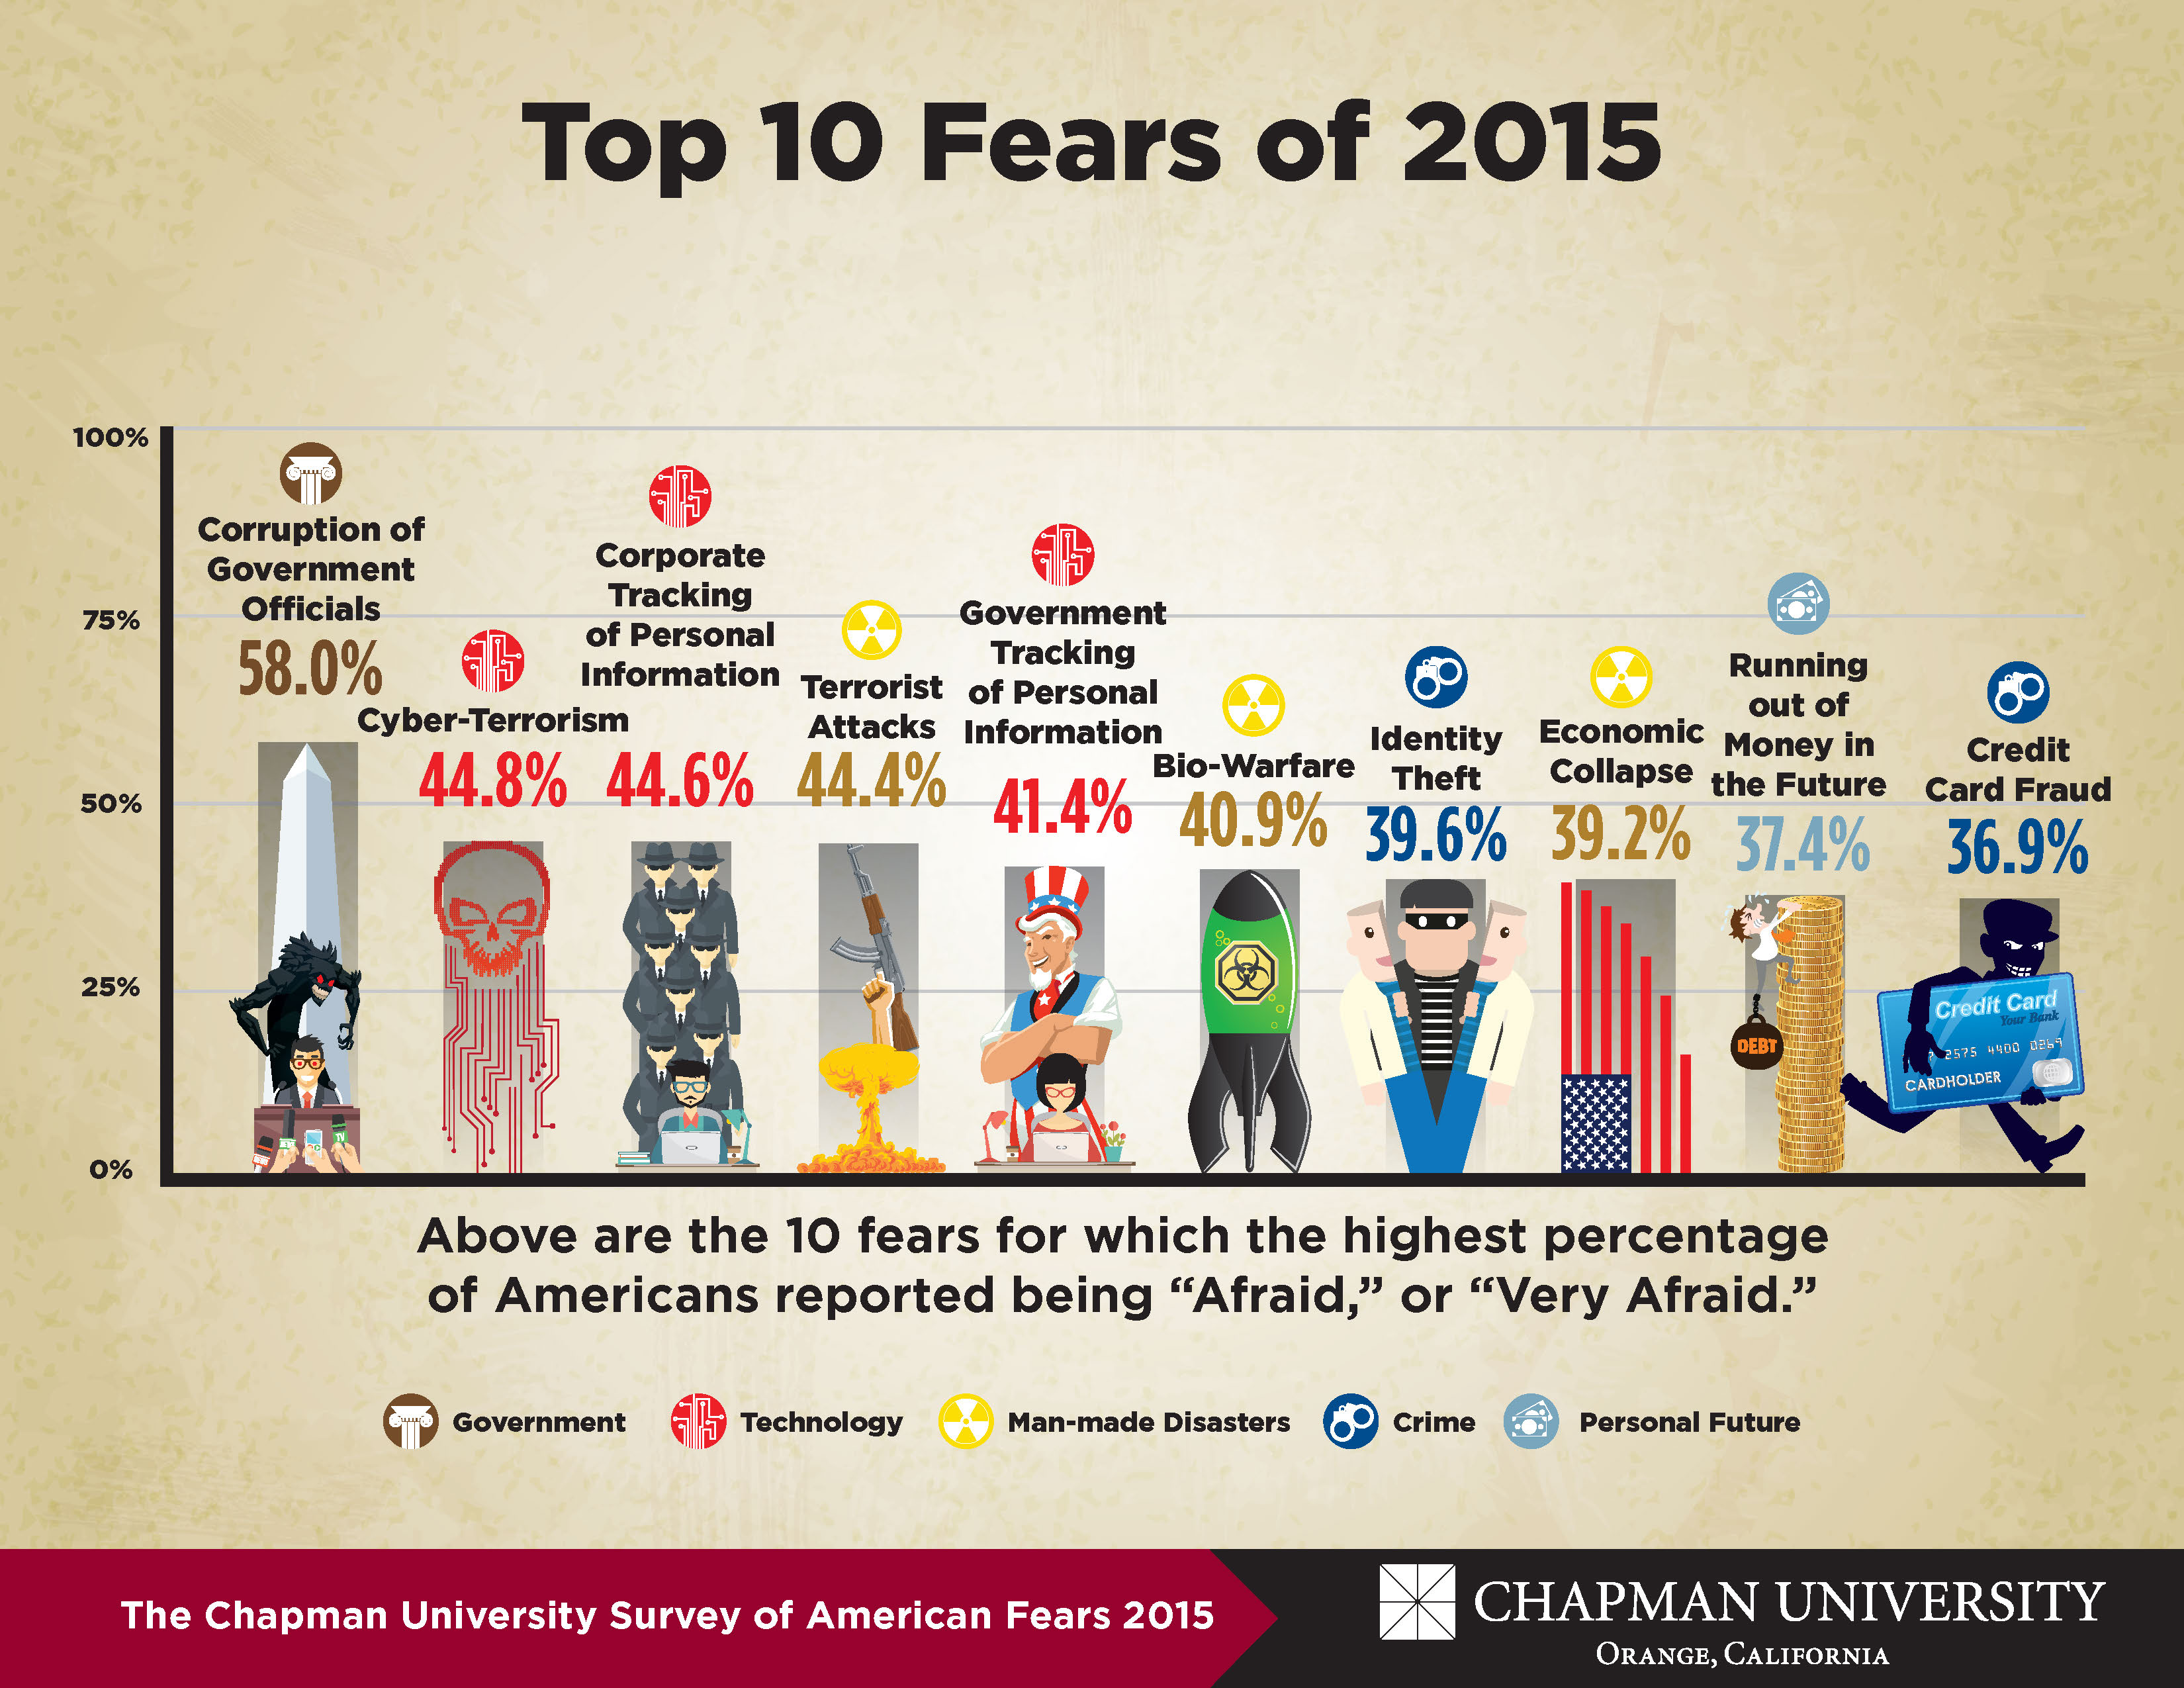 Top 10 Fears of 2015